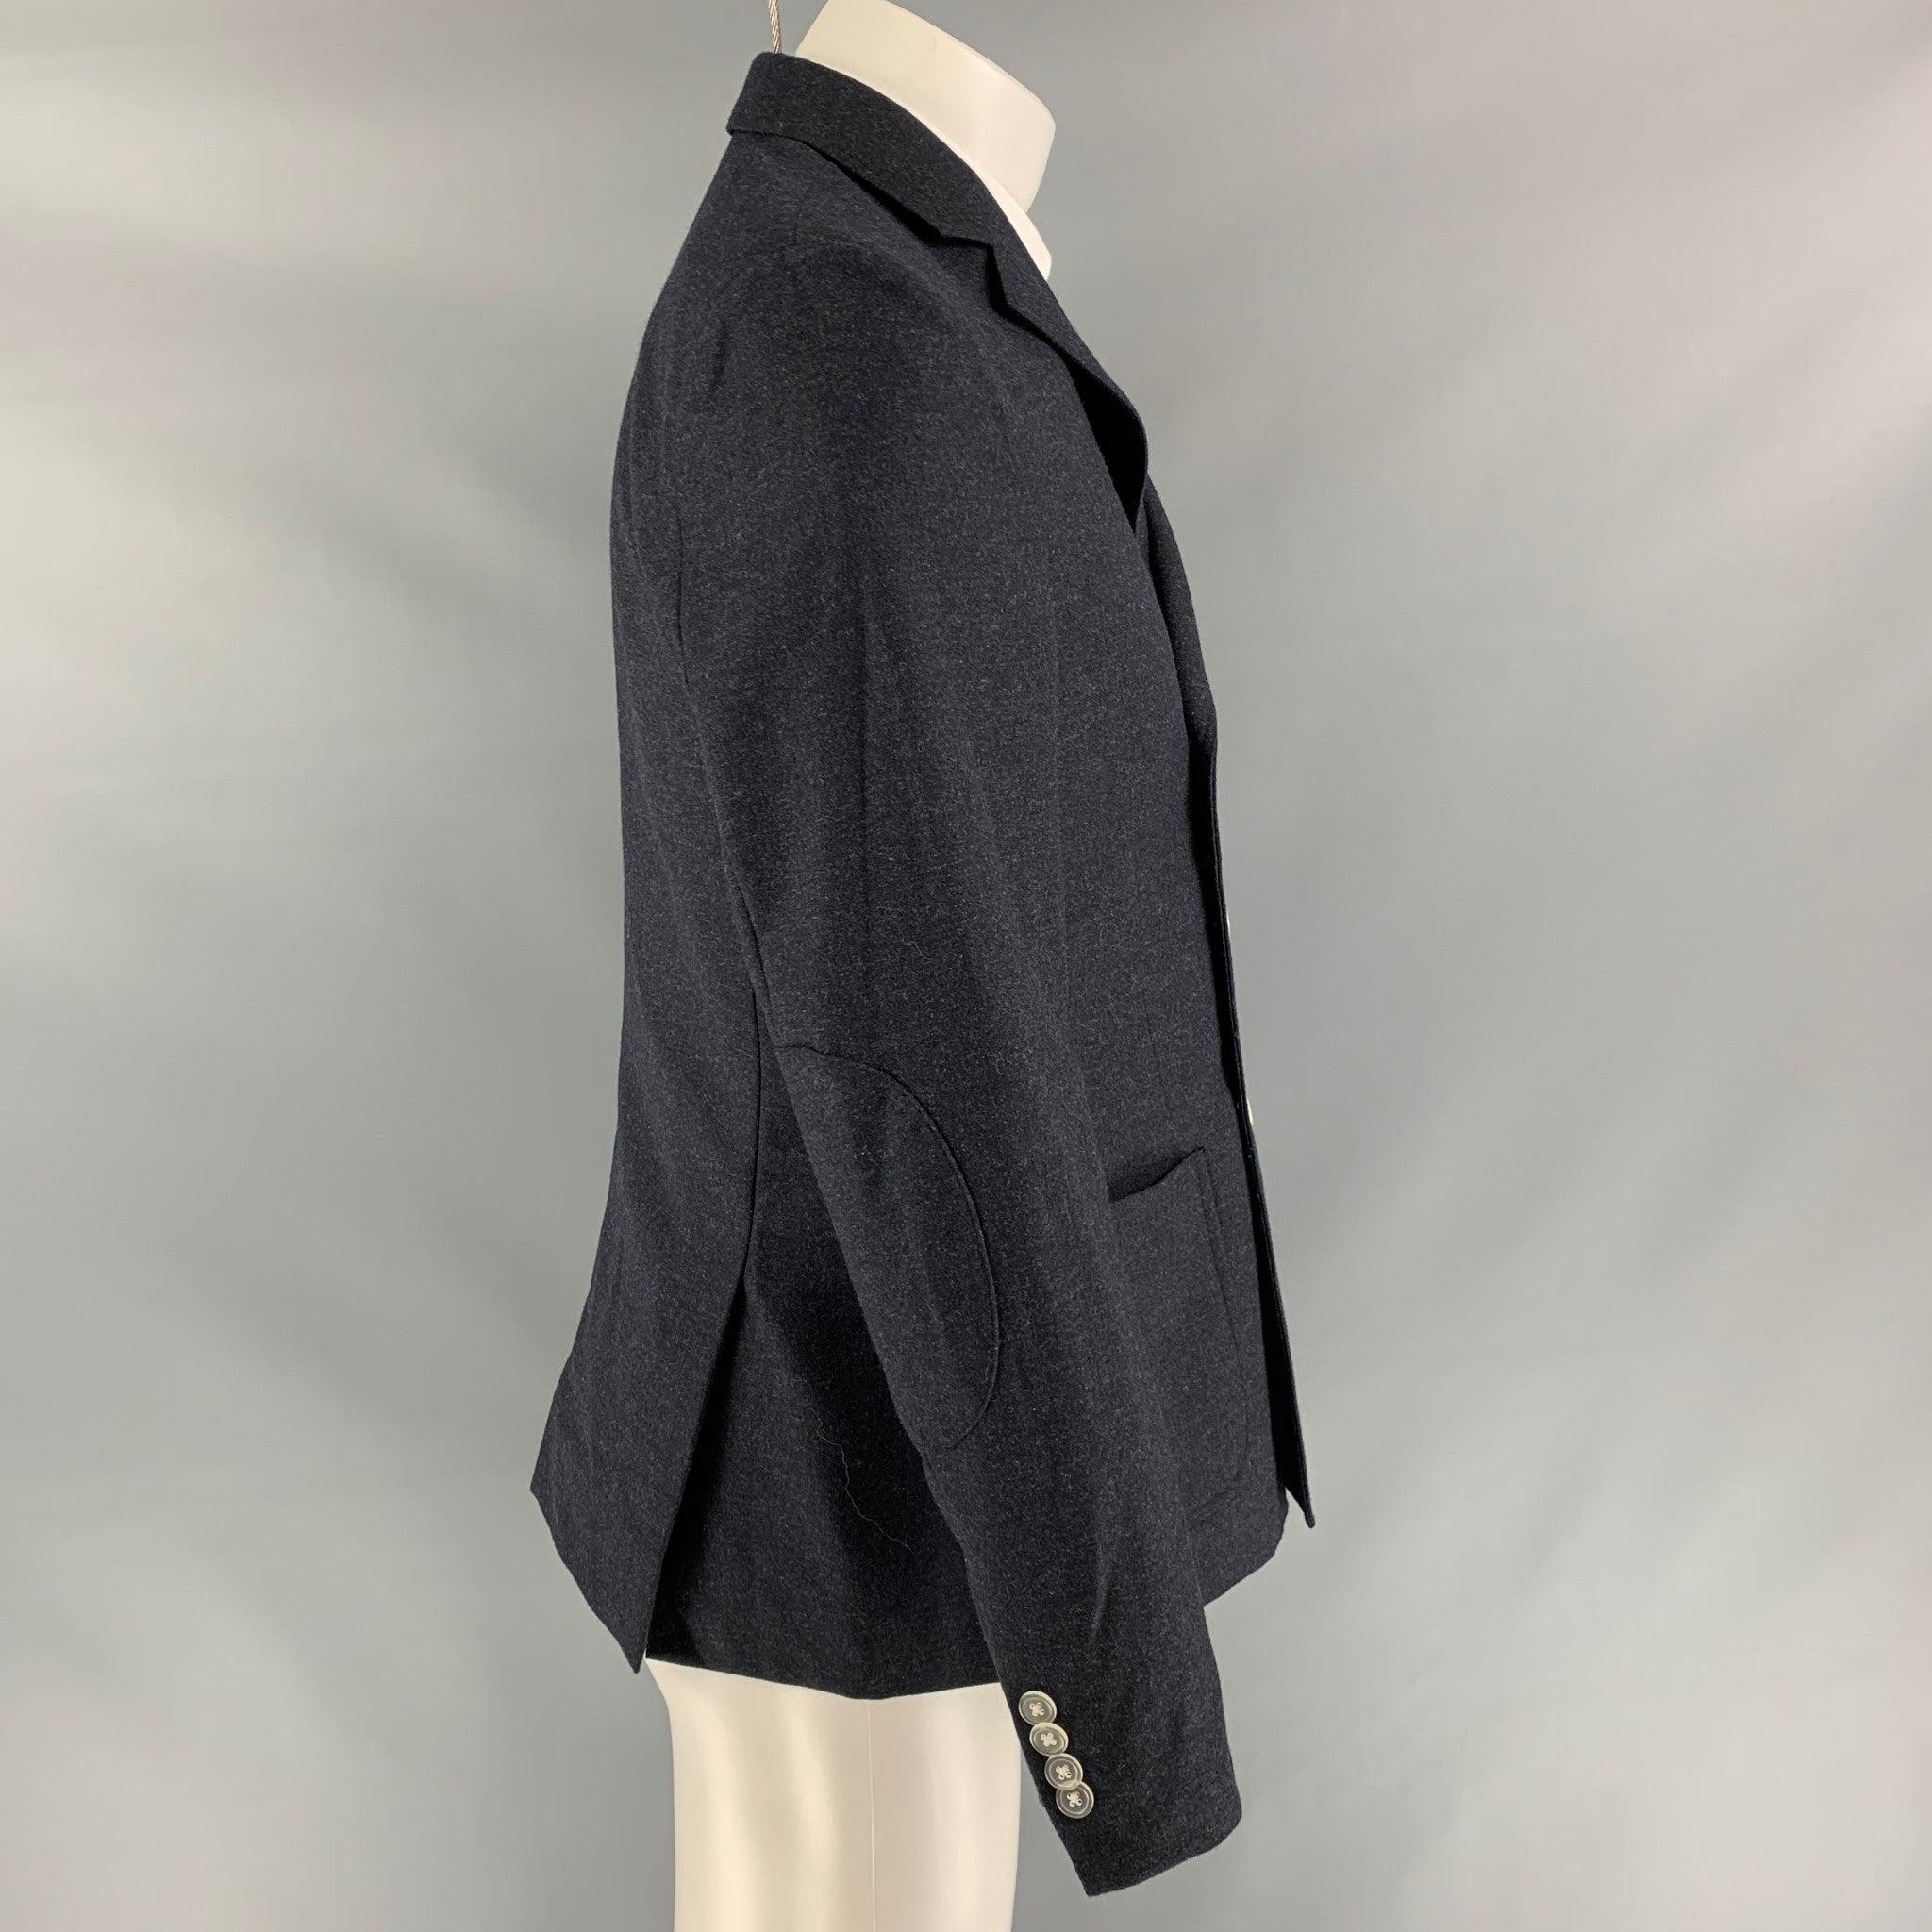 BAND OF OUTSIDERS Size 40 Charcoal Wool Double Breasted Sport Coat In Good Condition For Sale In San Francisco, CA